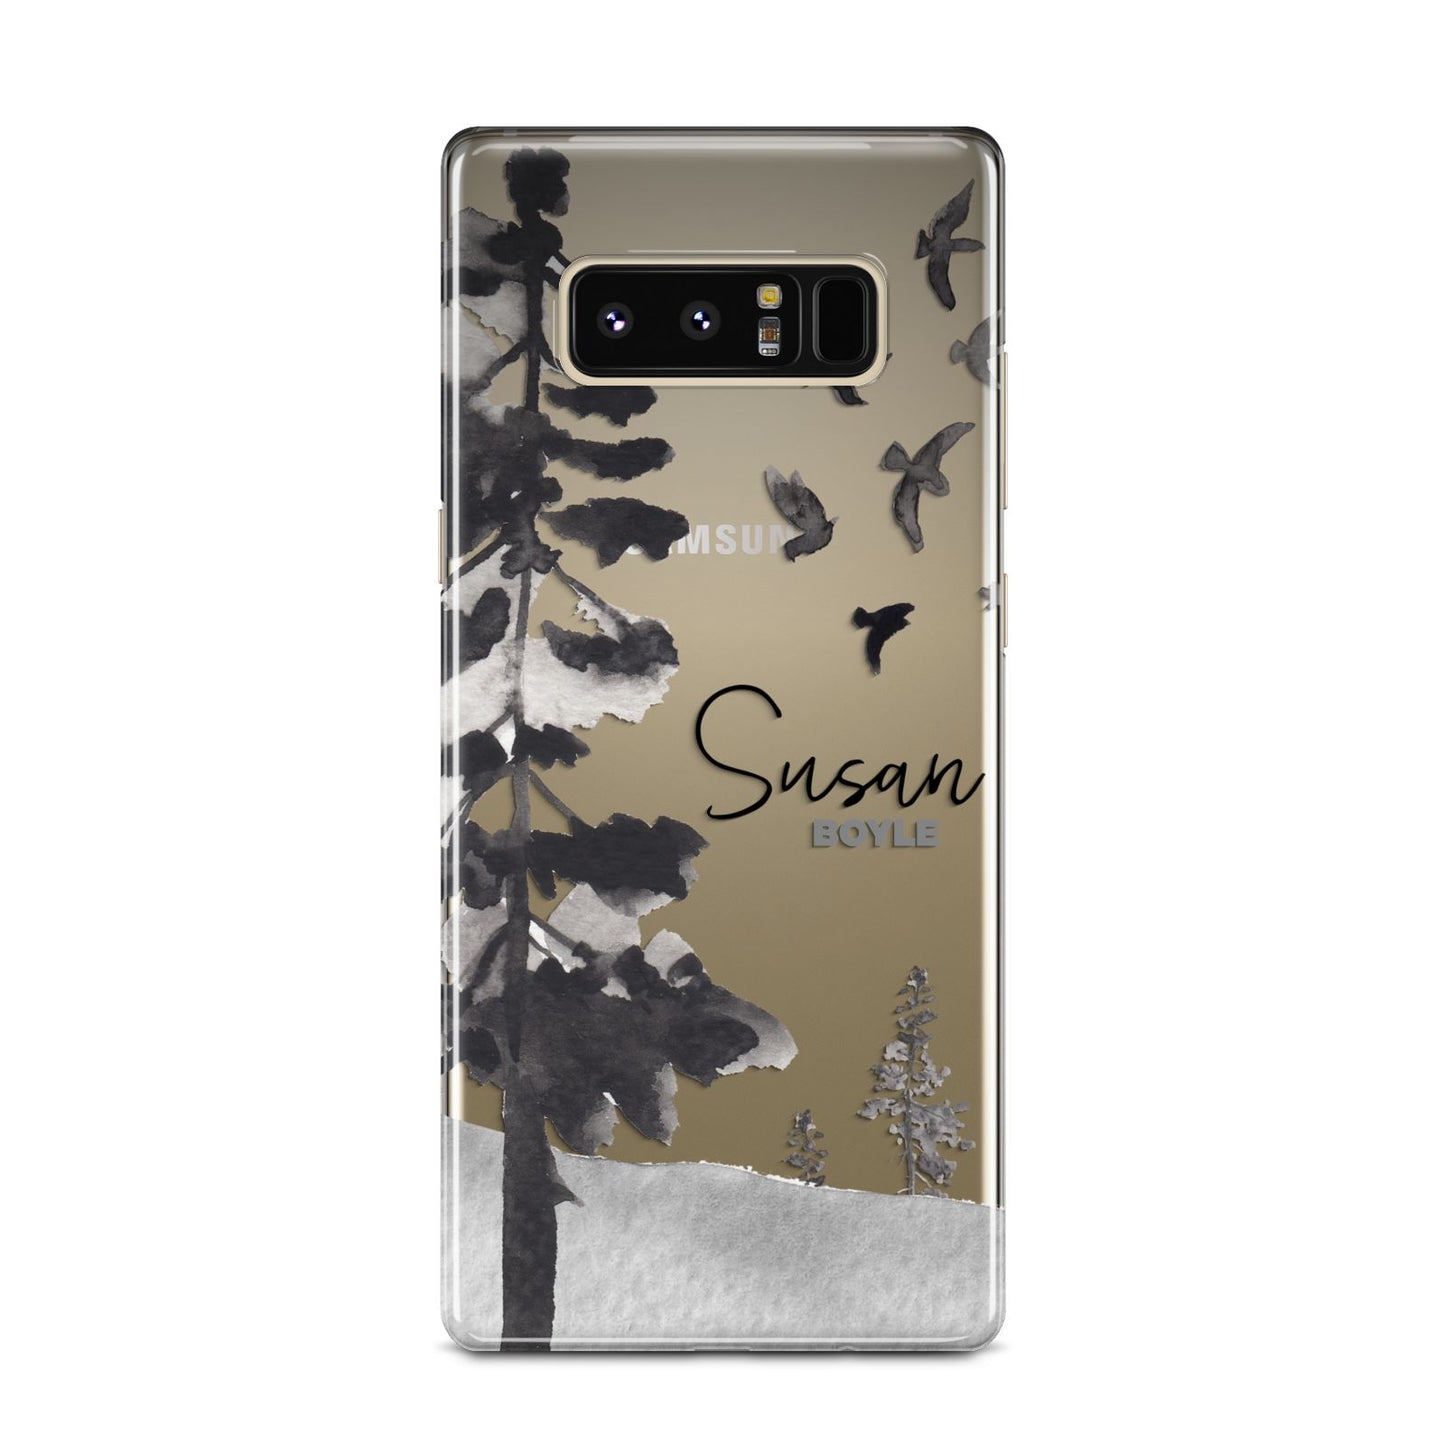 Personalised Monochrome Forest Samsung Galaxy Note 8 Case